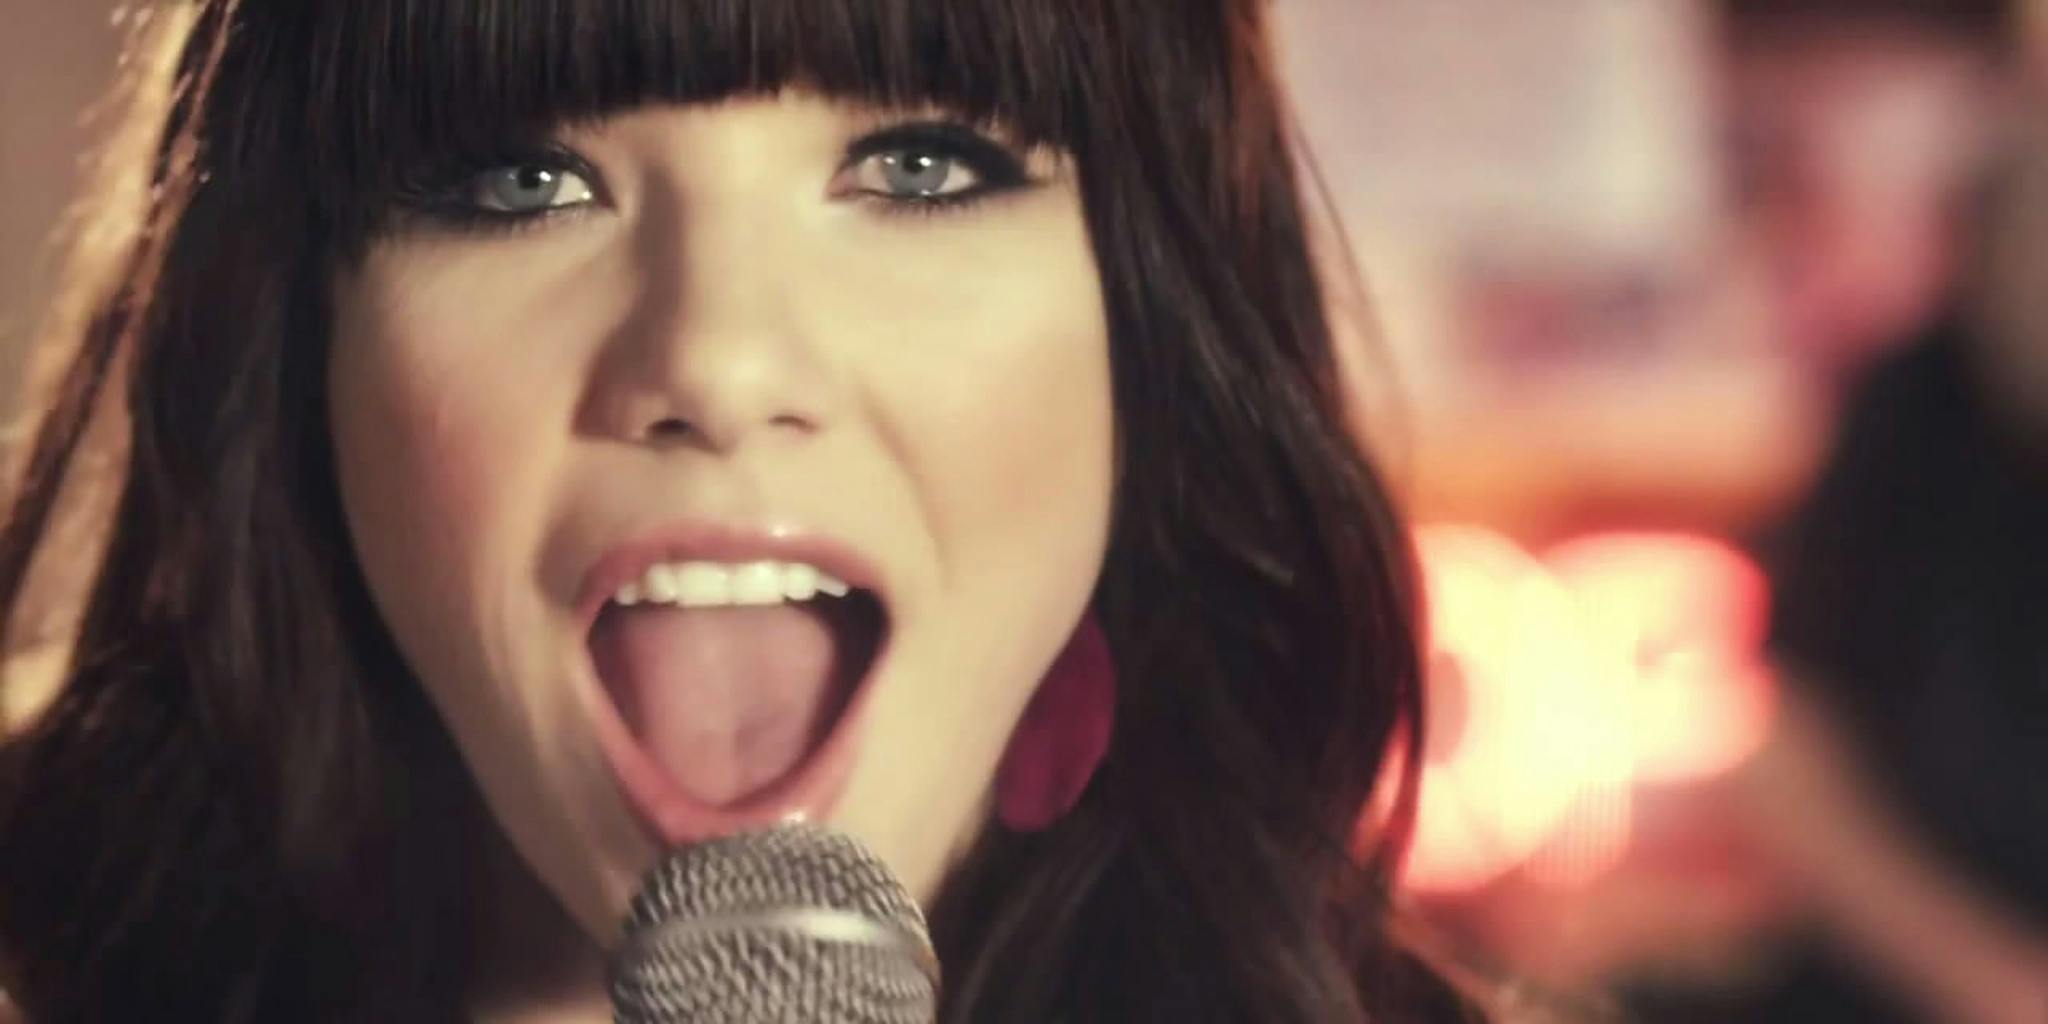 How 'Call Me Maybe' is killing Carly Rae Jepsen's career.